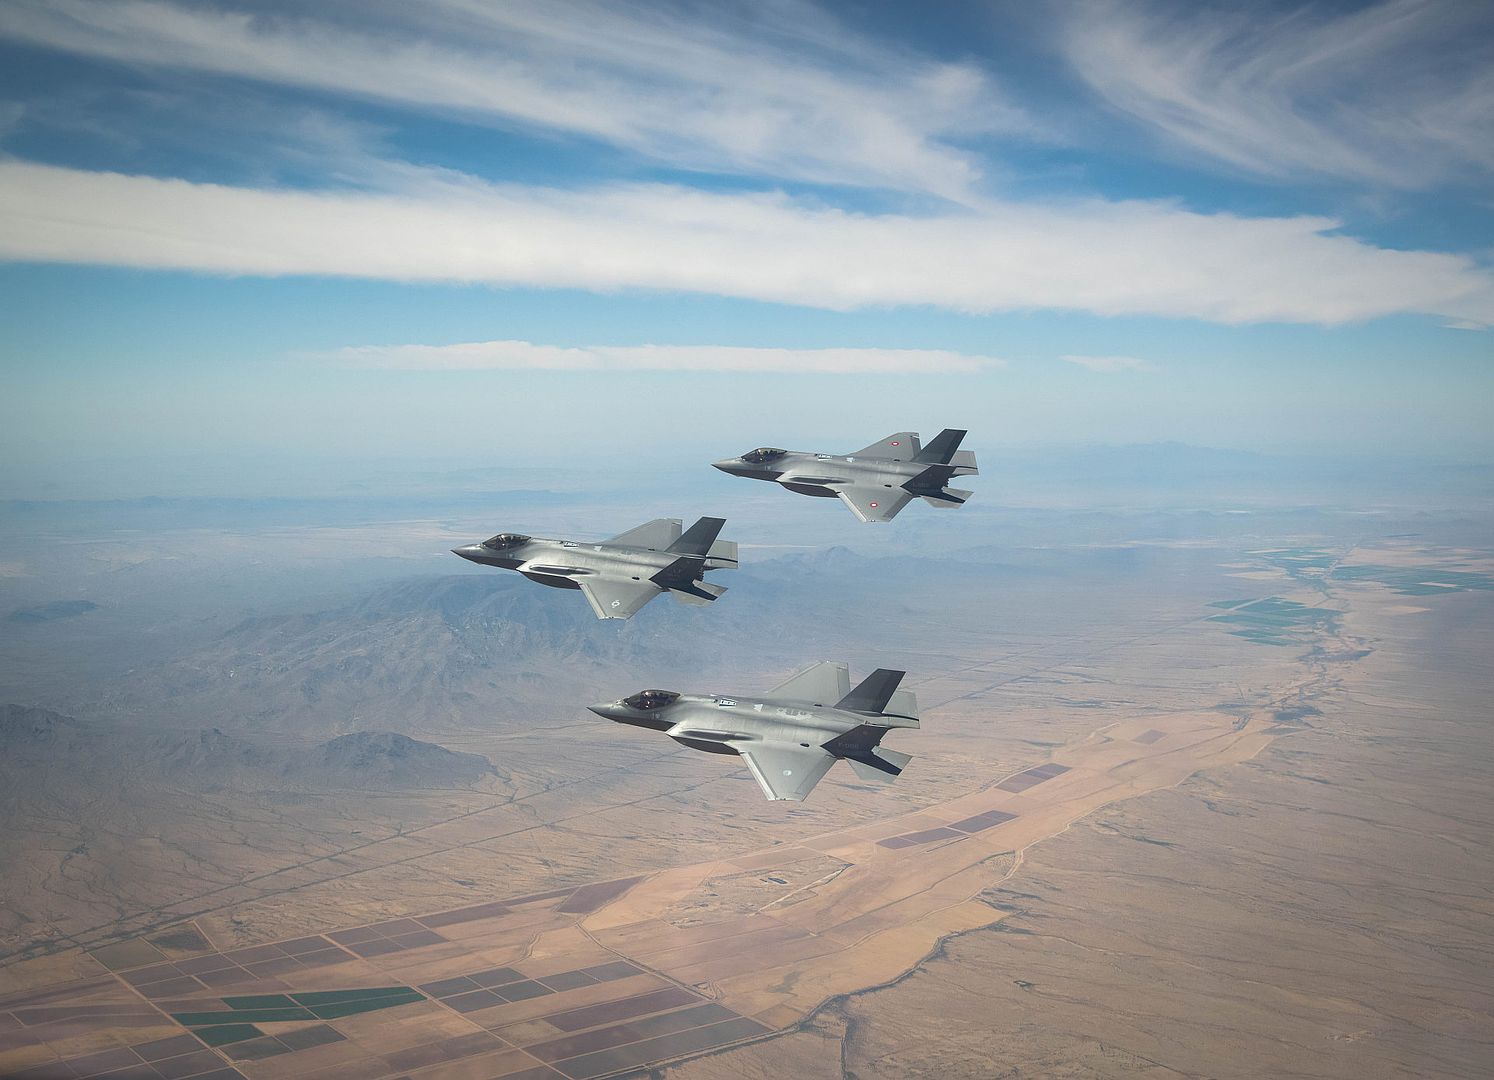 35A Lightning II Fighter Jet Assigned To The 308th Fighter Squadron Luke Air Force Base Arizona Fly In Formation May 5 2021